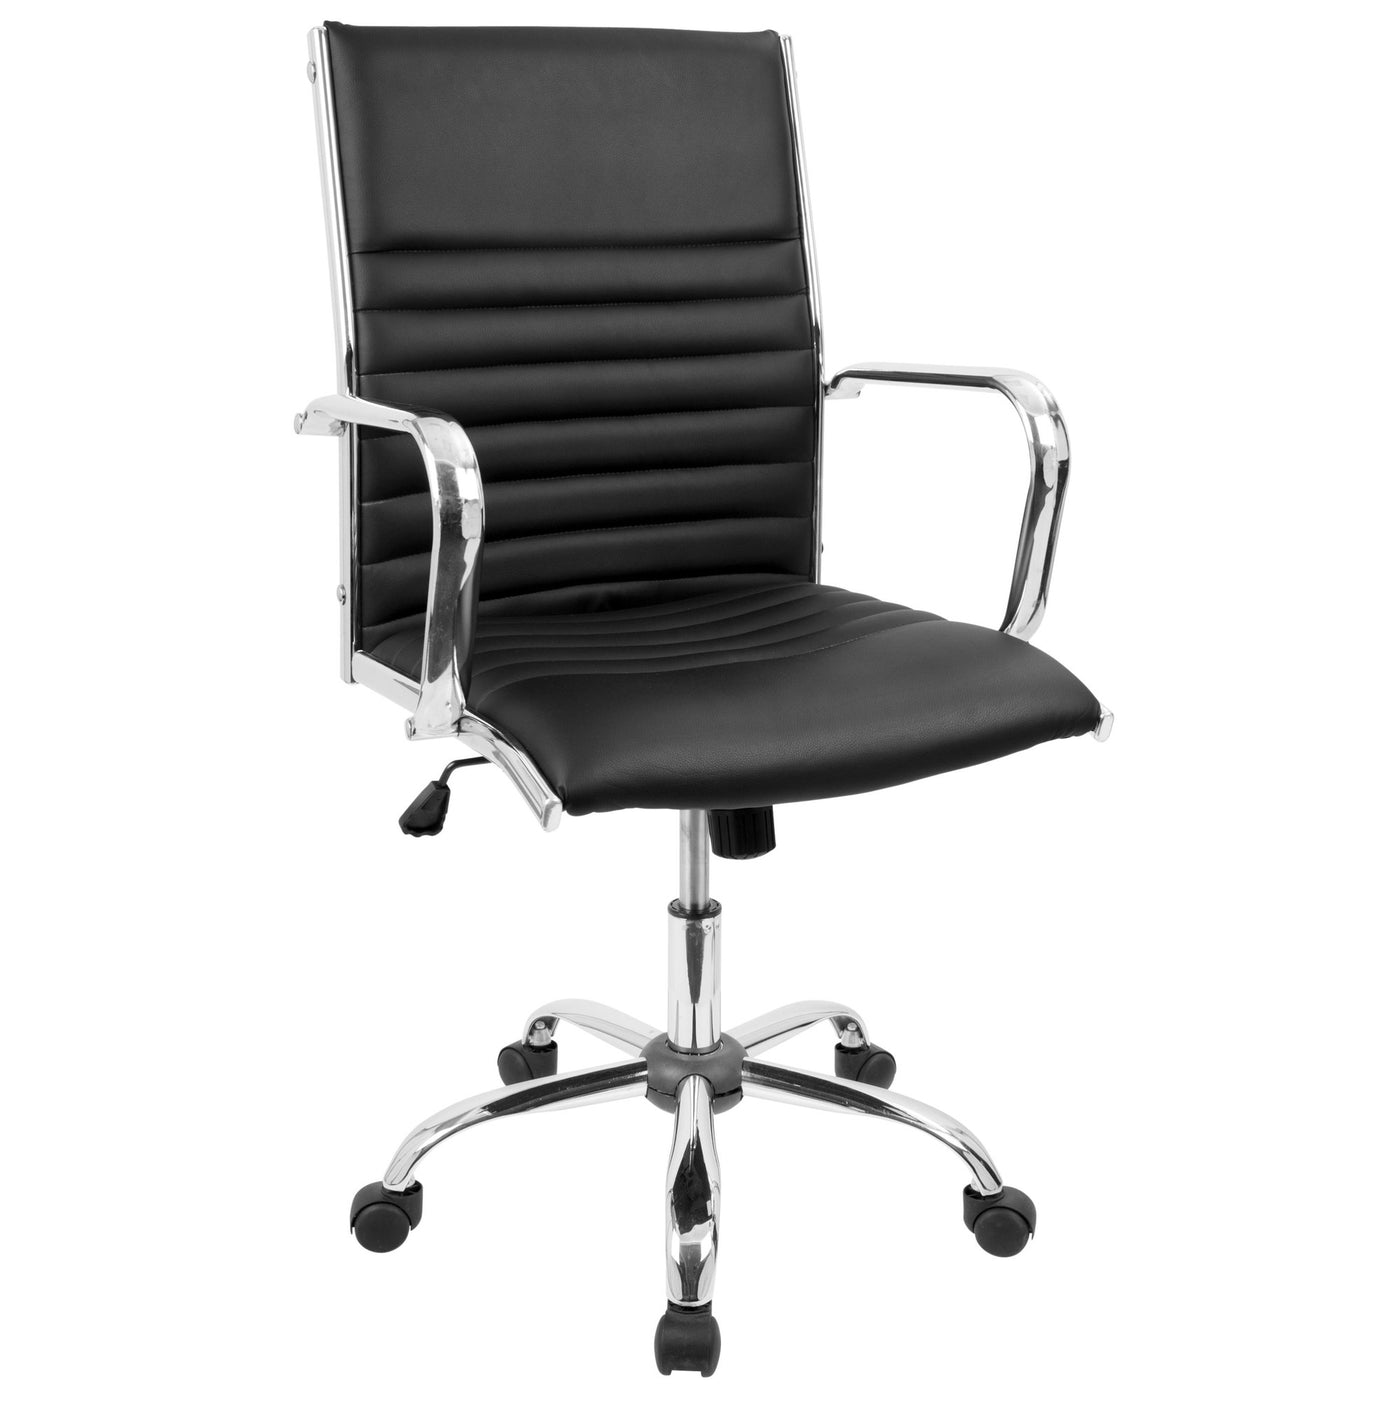 Master Office Chair - Black